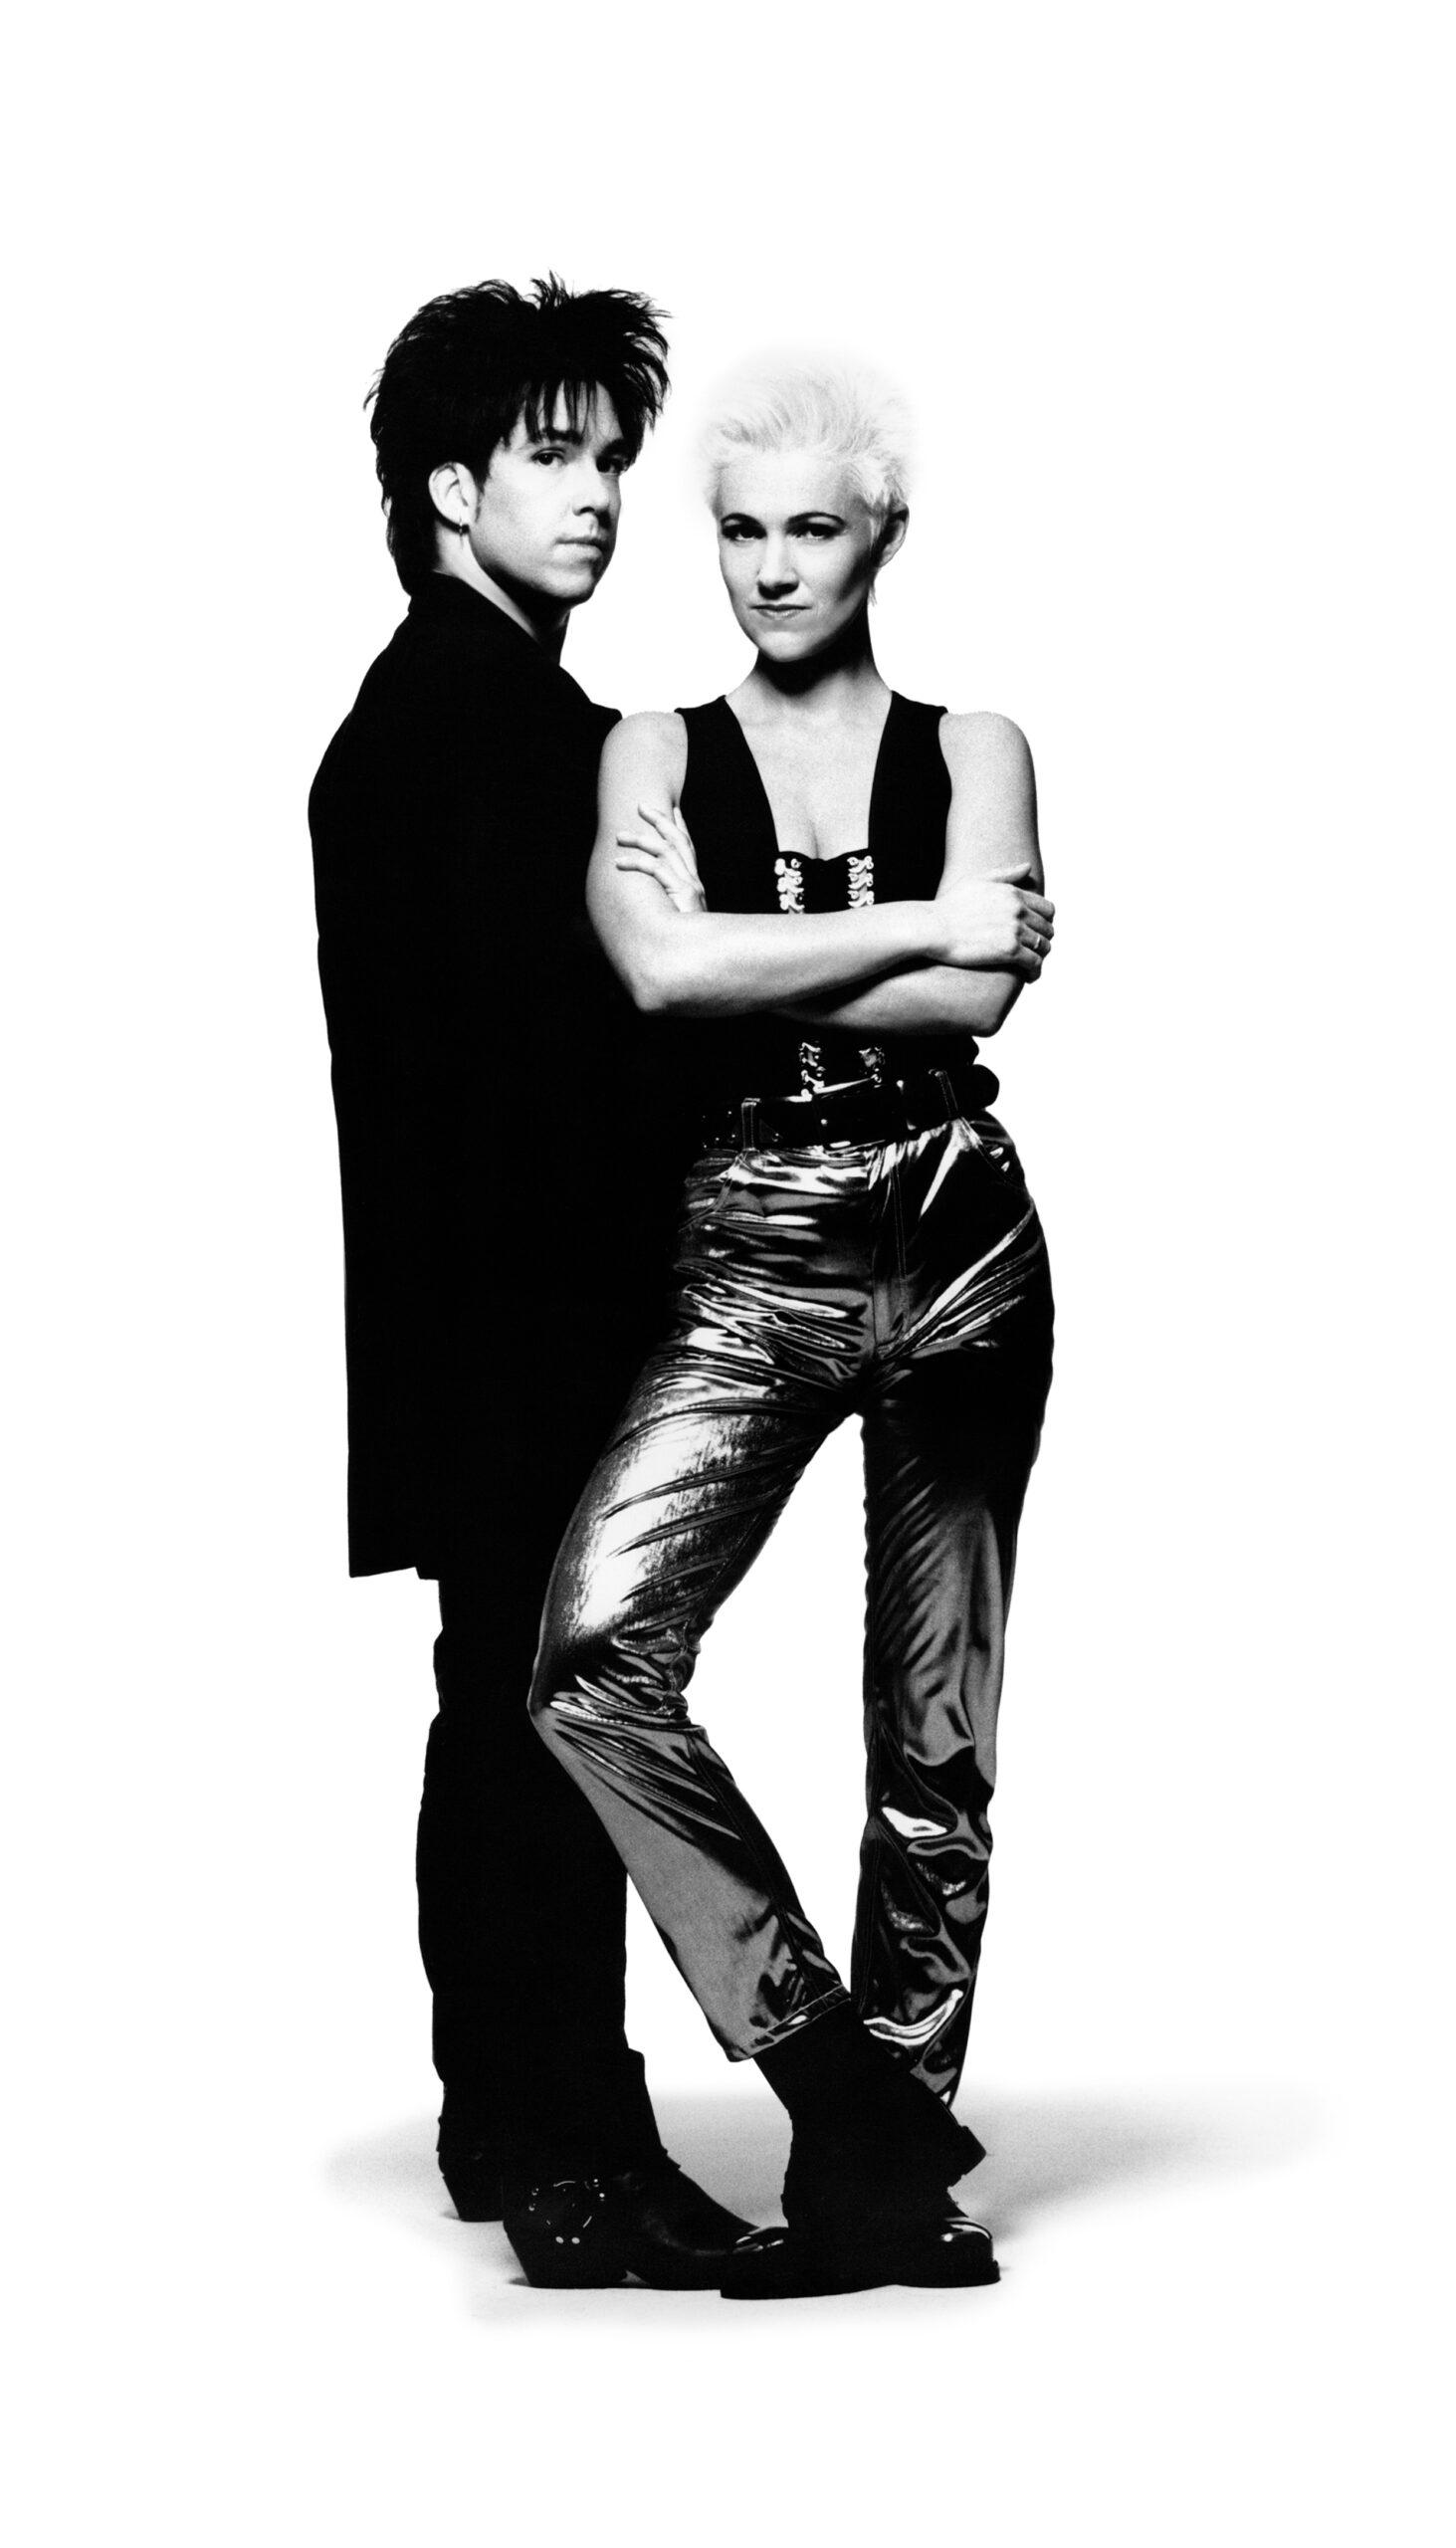 Black-and-white photo of the band Roxette, with Per Gessle to the left and Marie Fredriksson to the right.